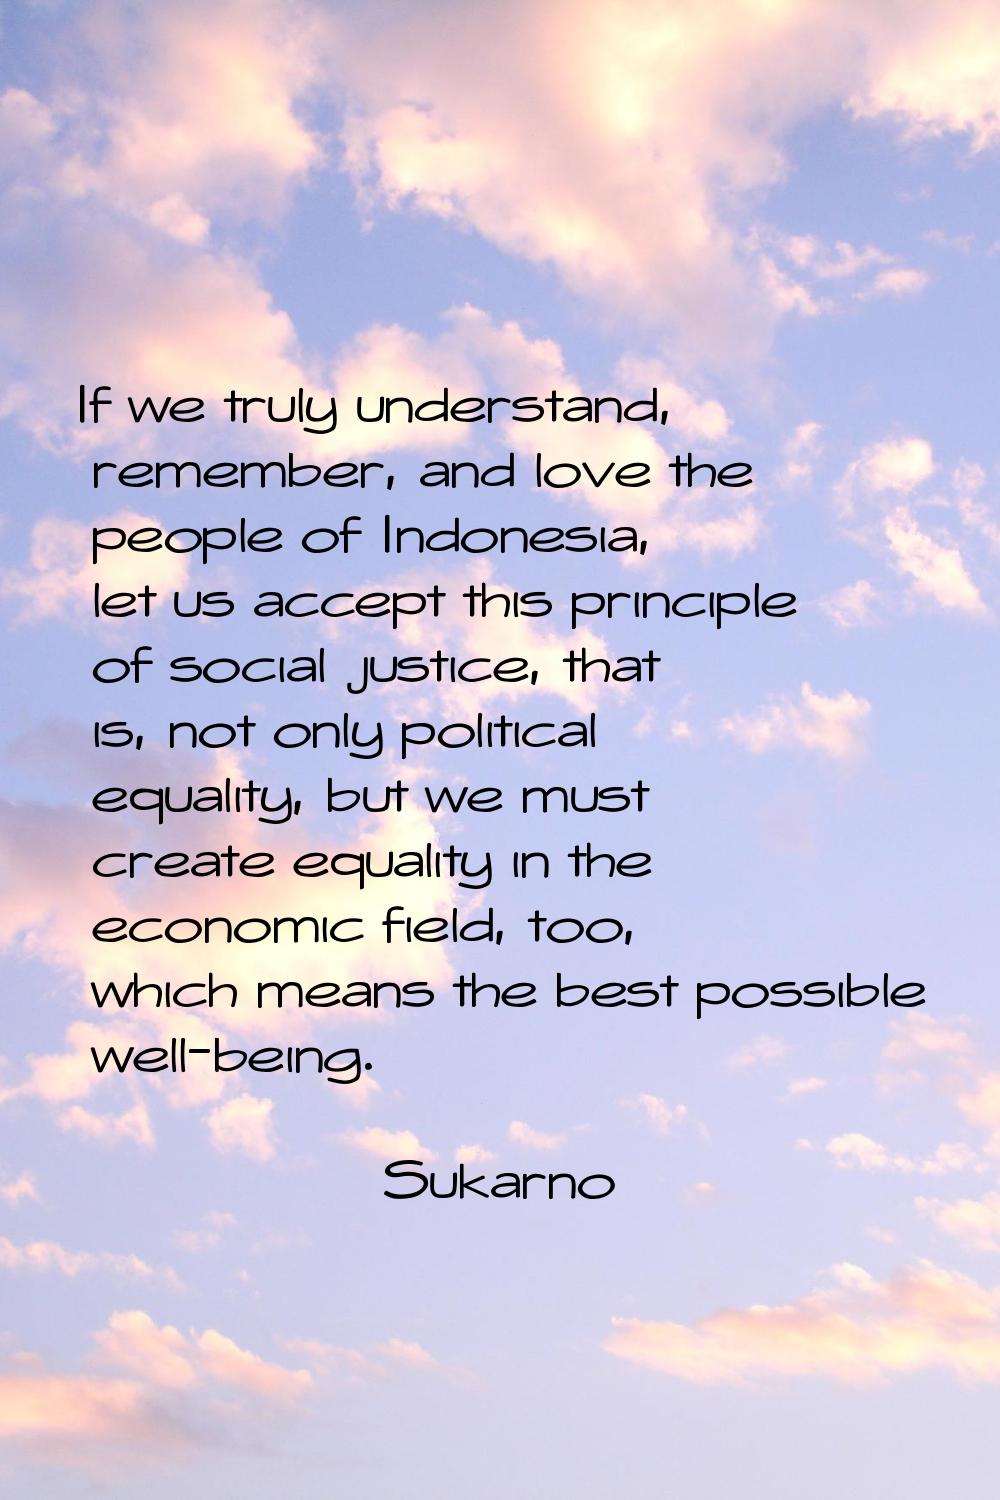 If we truly understand, remember, and love the people of Indonesia, let us accept this principle of